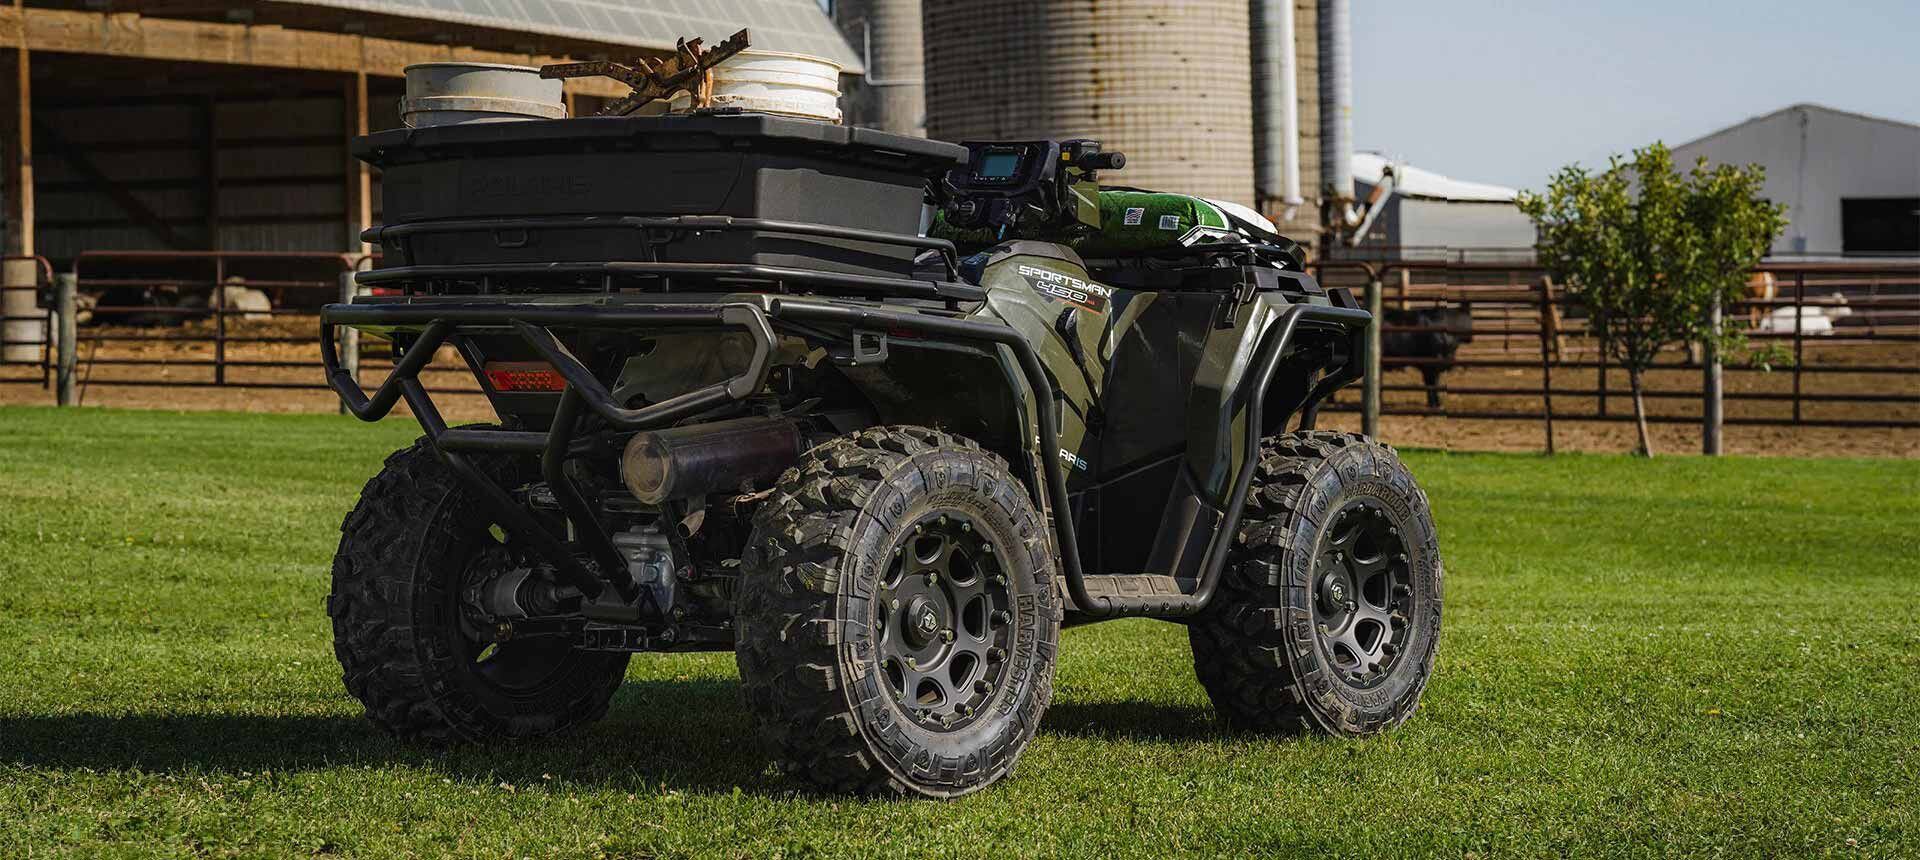 We go down the rabbit hole of Polaris accessories and bring some useful ones back to the surface.